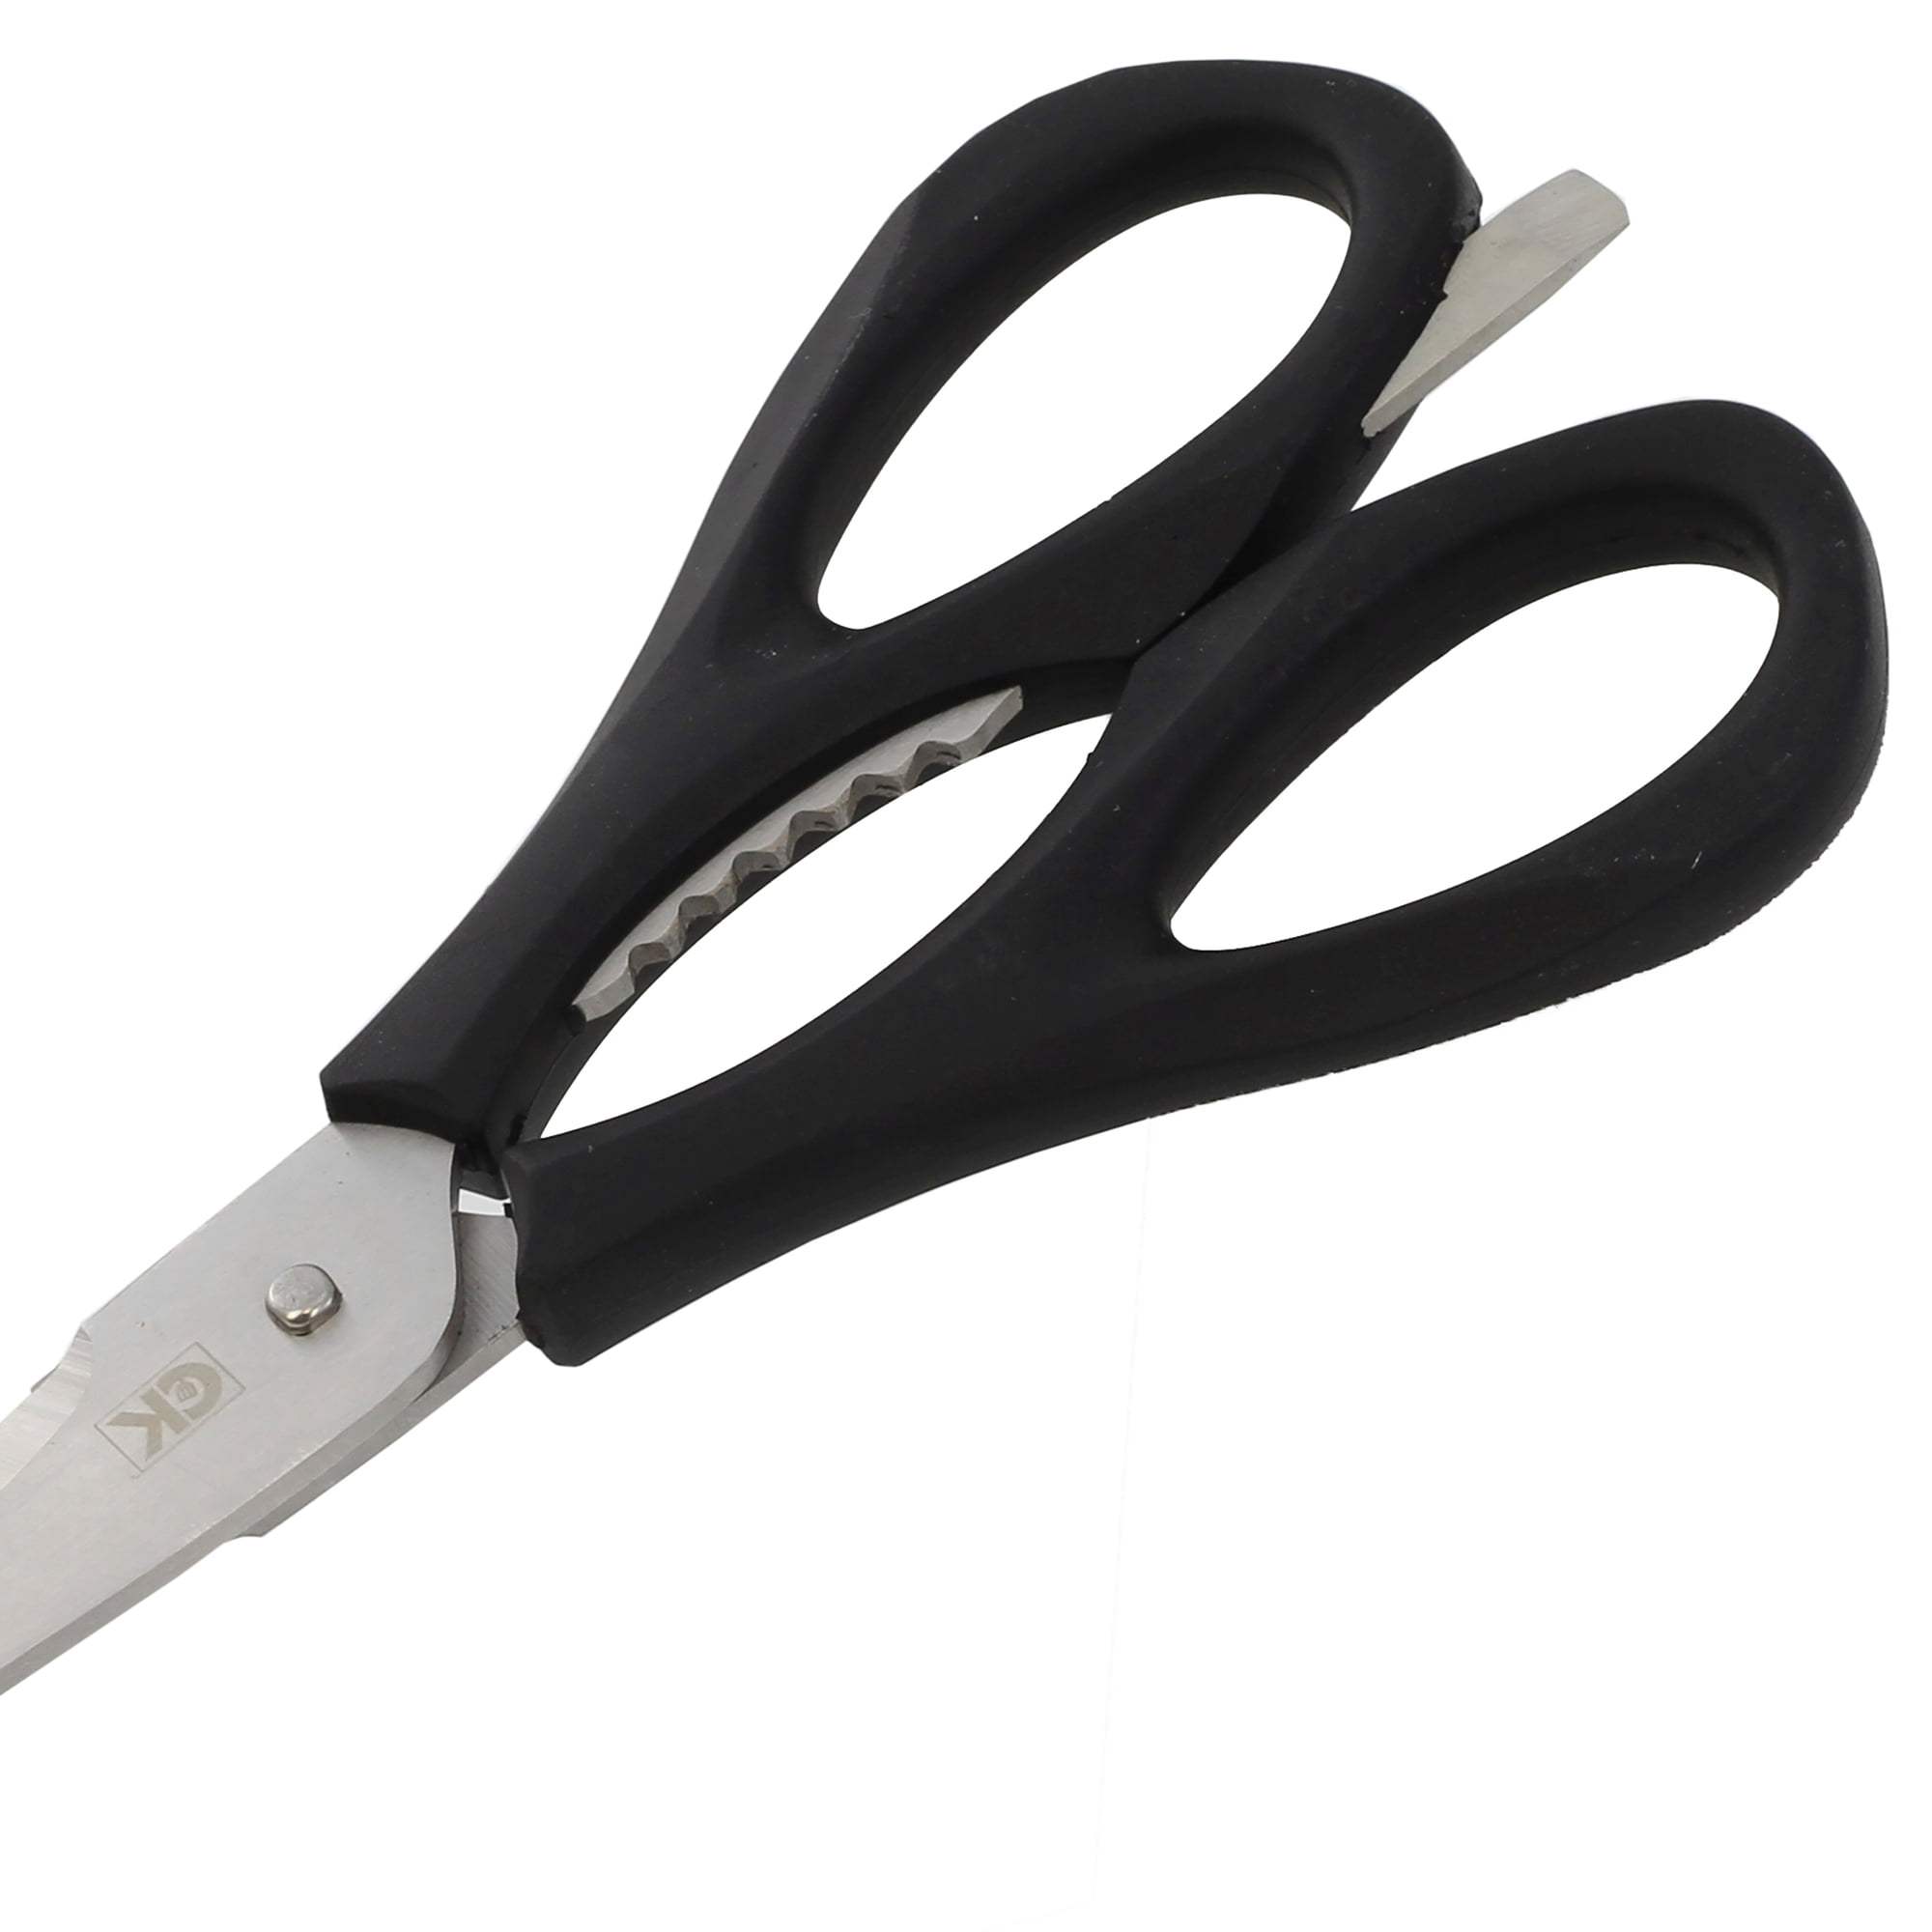 Celebrate It Soft Grip Stainless Steel Kitchen Shears - 8.72 x 3.62 x 0.63 in